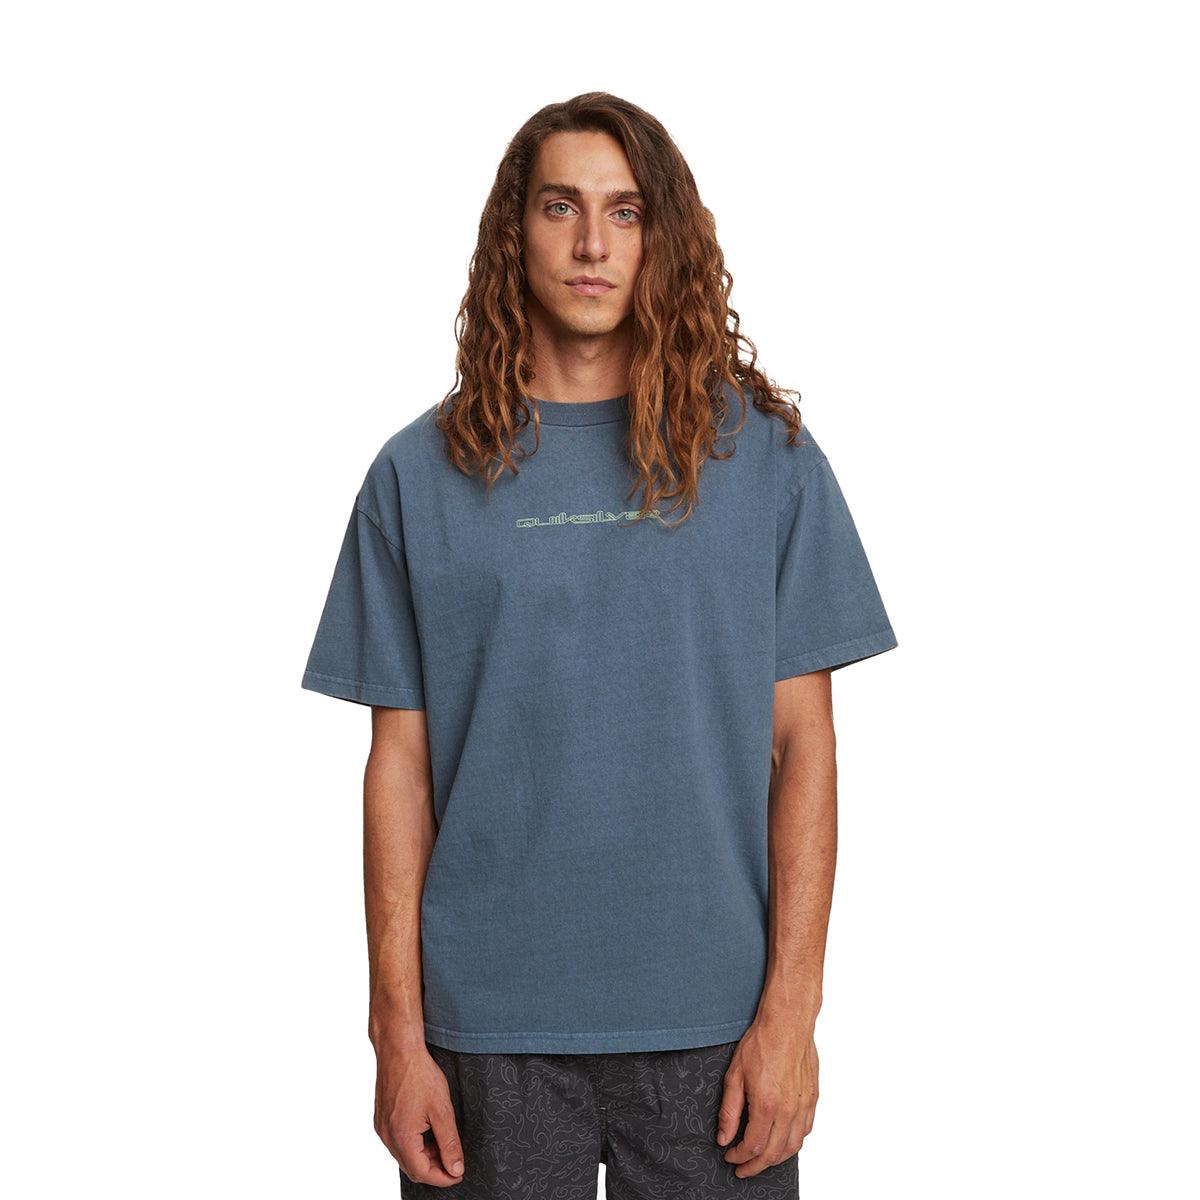 Remera Quiksilver Tribal Times Azul - Indy